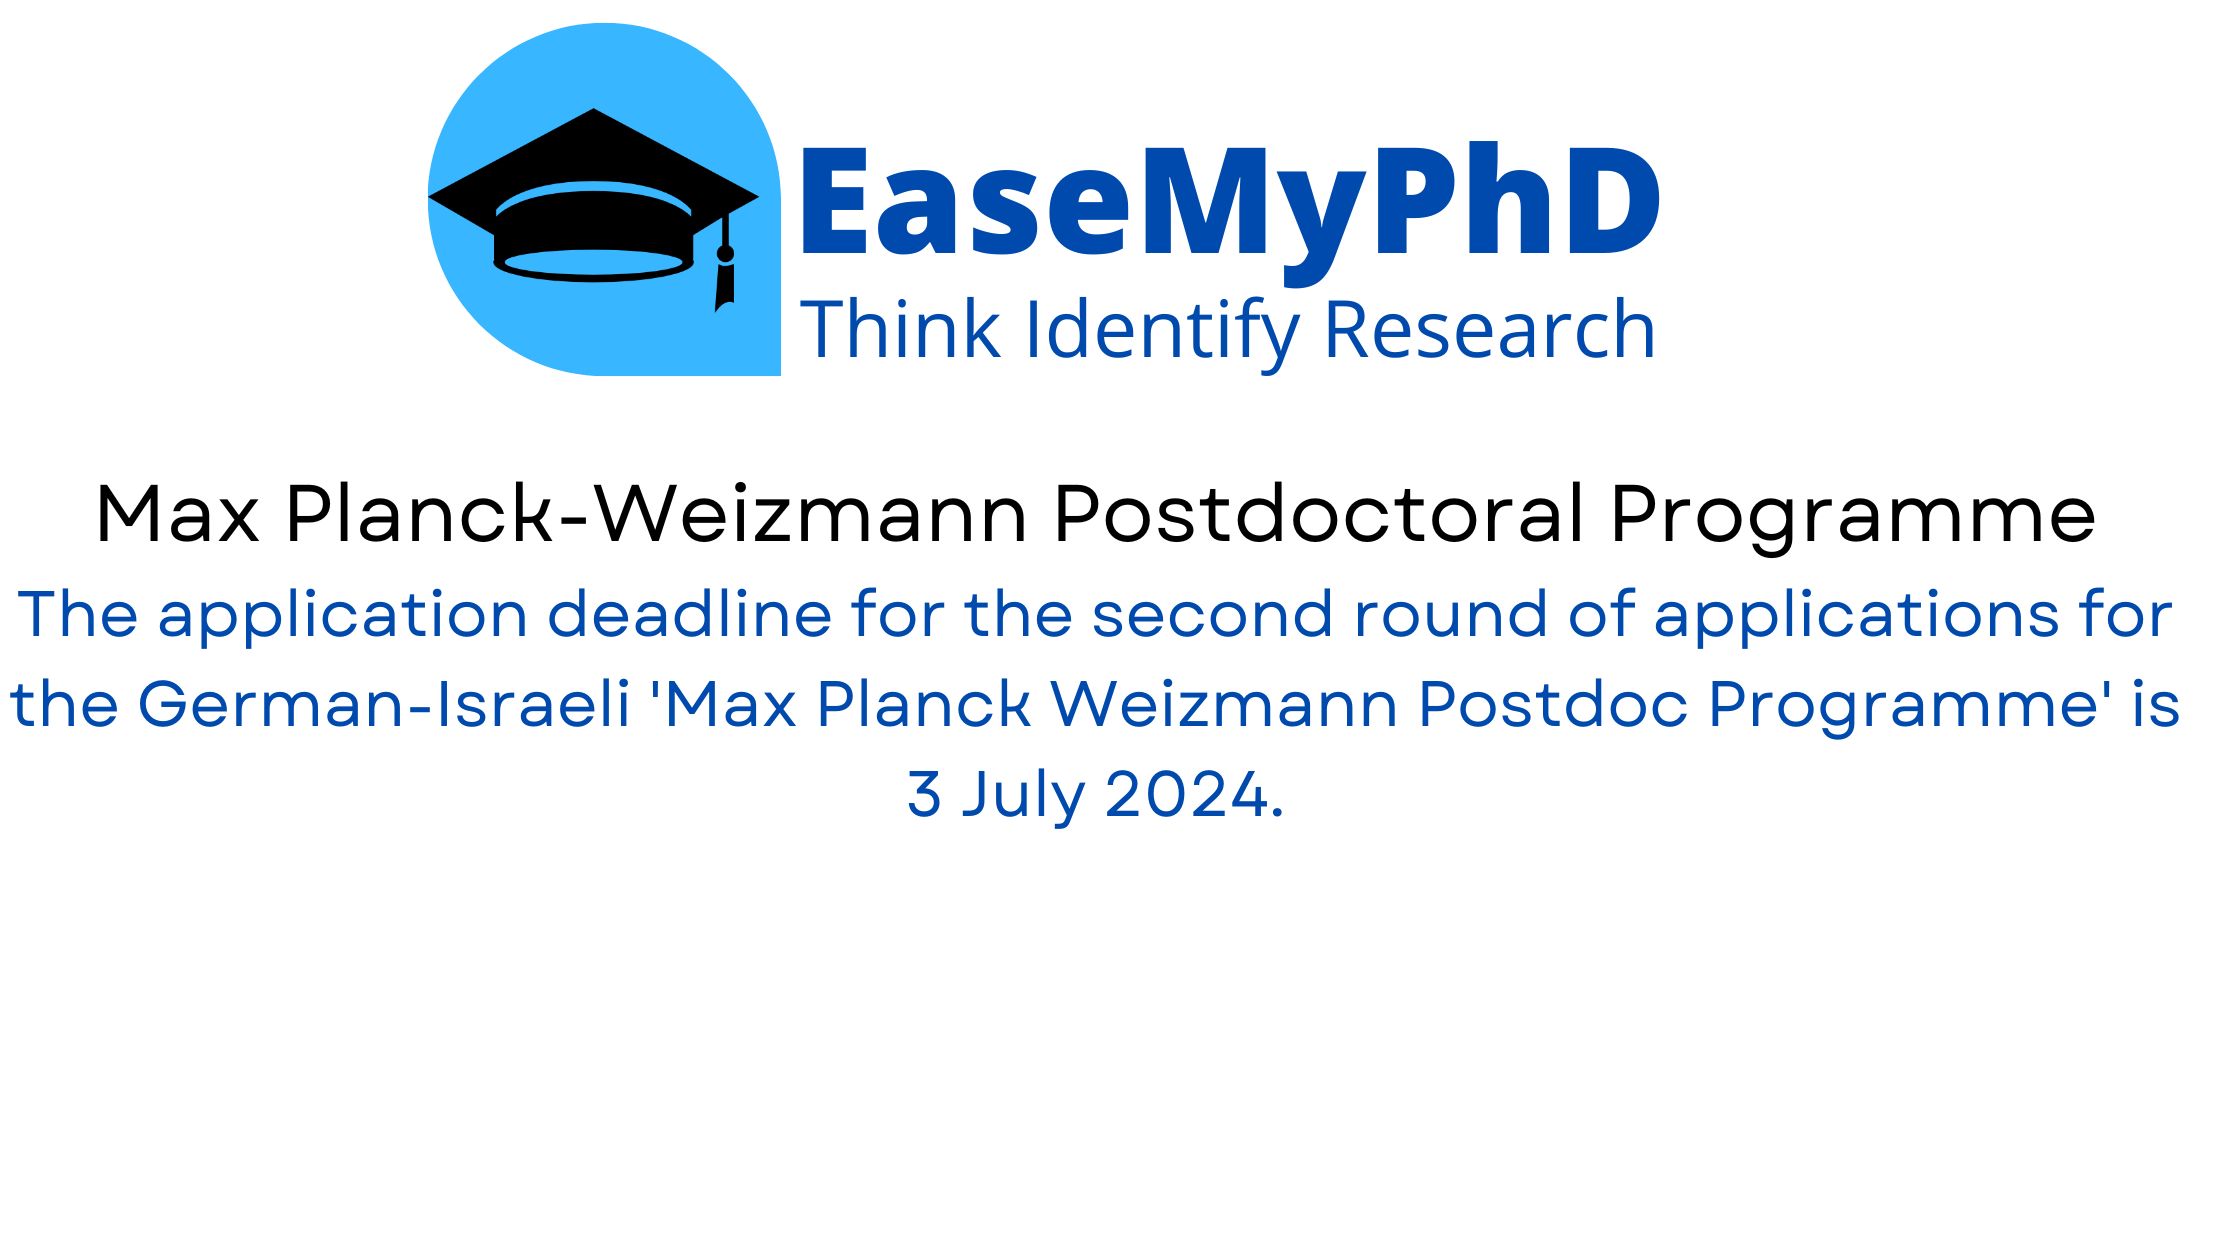 Max Planck-Weizmann Postdoctoral Programme The application deadline for the second round of applications for the German-Israeli 'Max Planck Weizmann Postdoc Programme' is 3 July 2024.